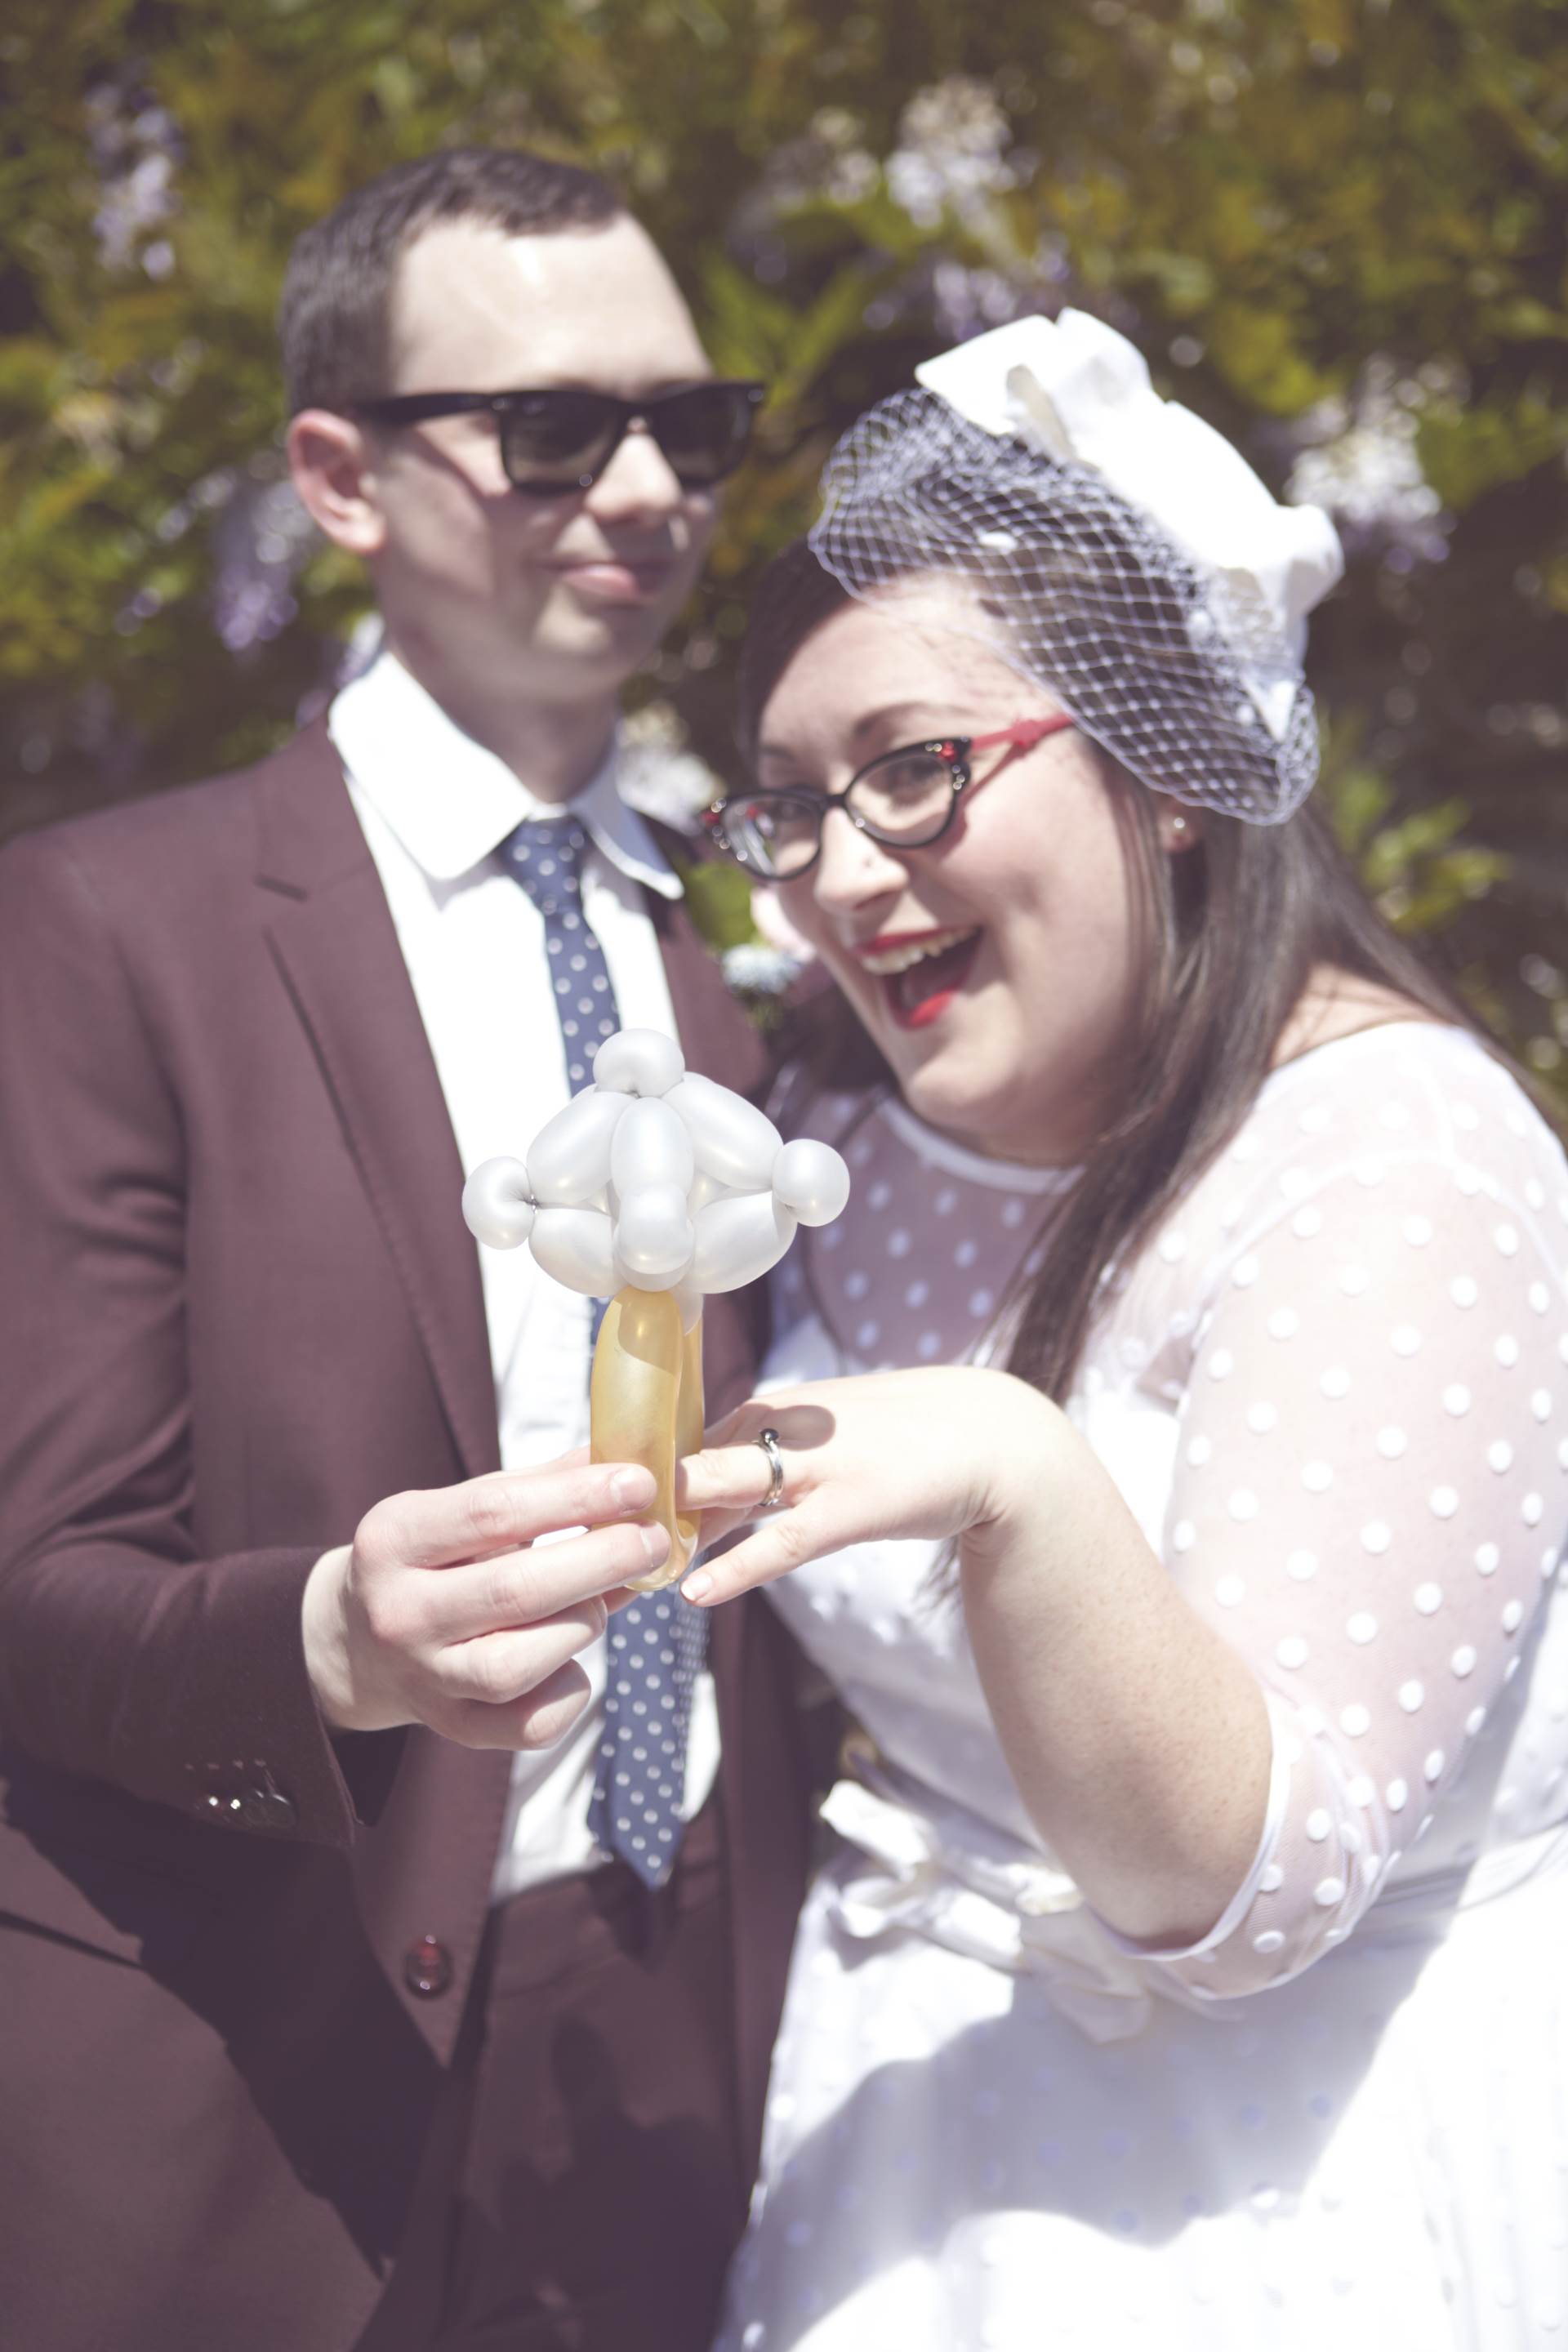 Dan and Maddi's Vintage Americana Country Wedding by Natalie J Weddings and featured on The National Vintage Wedding Fair 